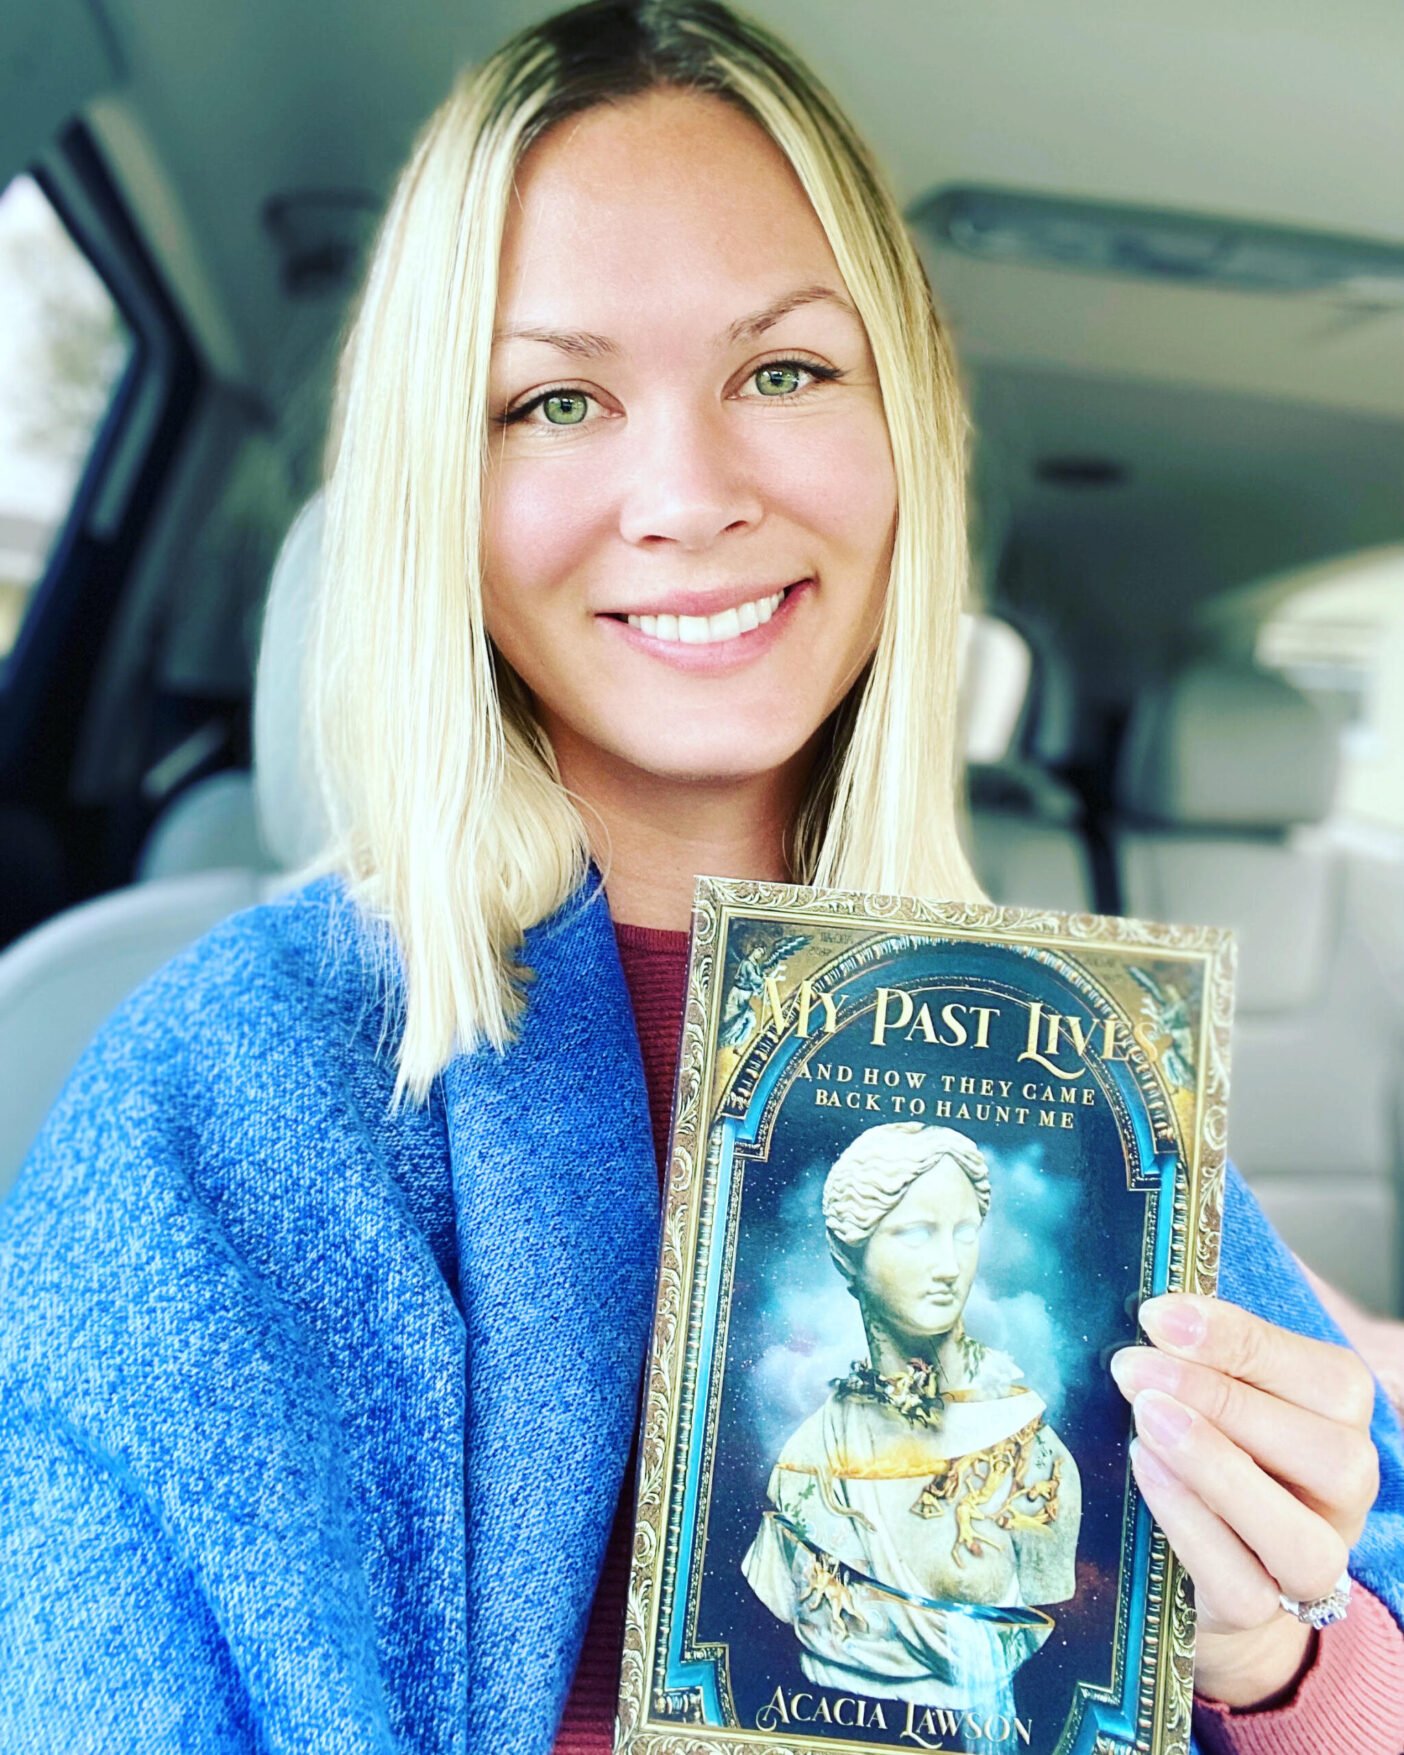 Acacia Lawson holding her book 'My Past Lives'